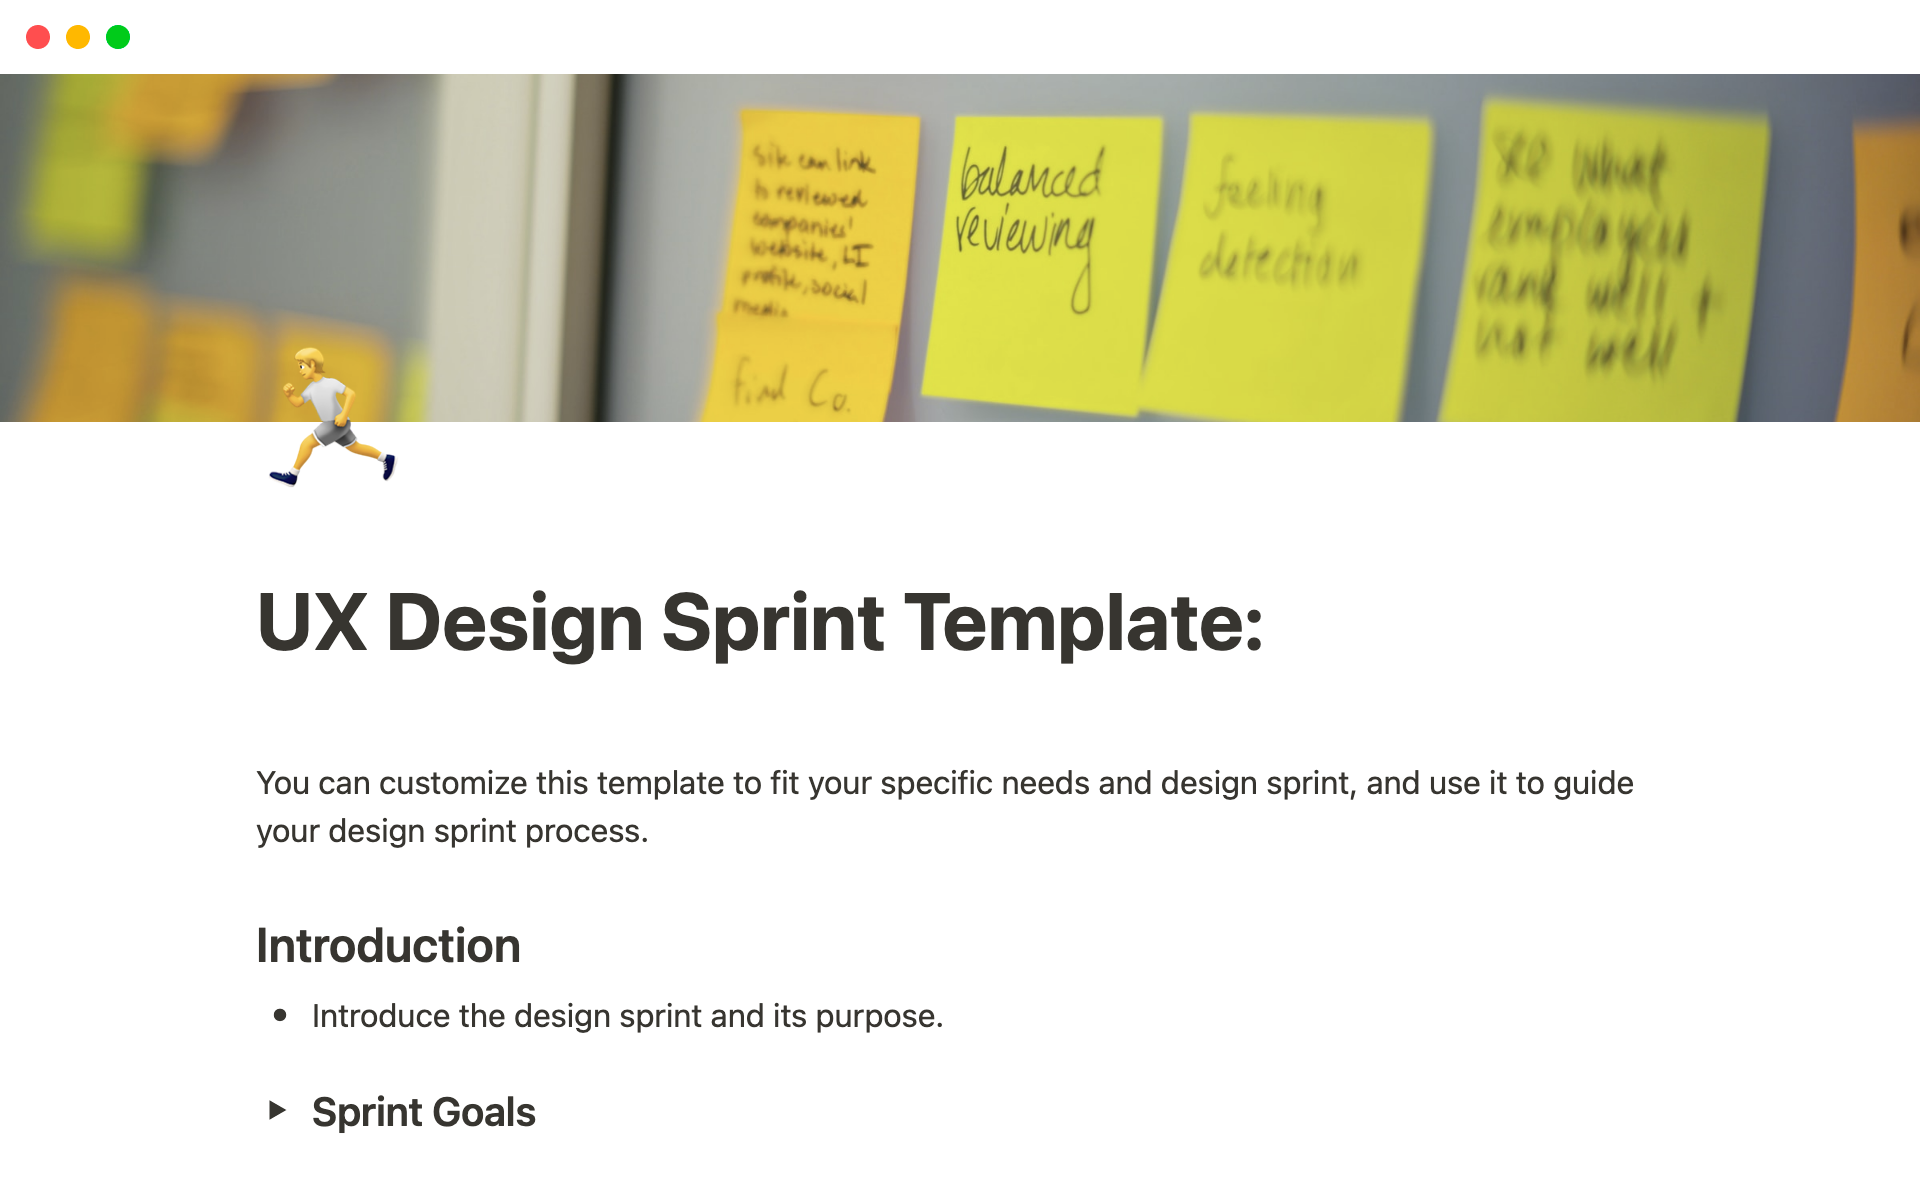 It guides users through the design sprint process, from setting goals to delivering prototypes.